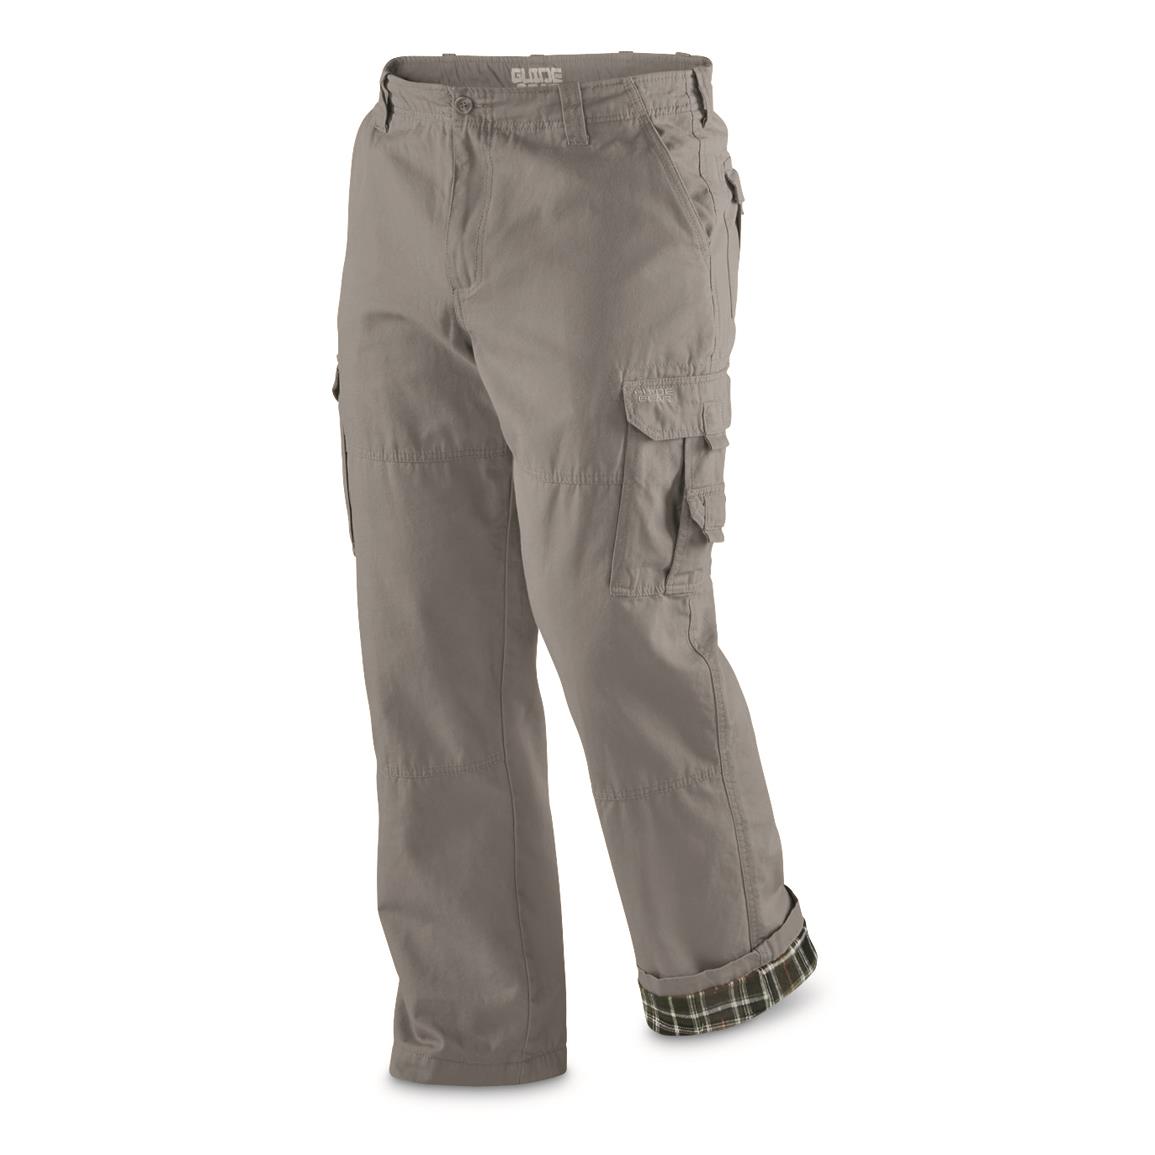 Guide Gear Men's Flannel Lined Cargo Pants - 700971, Insulated Pants ...